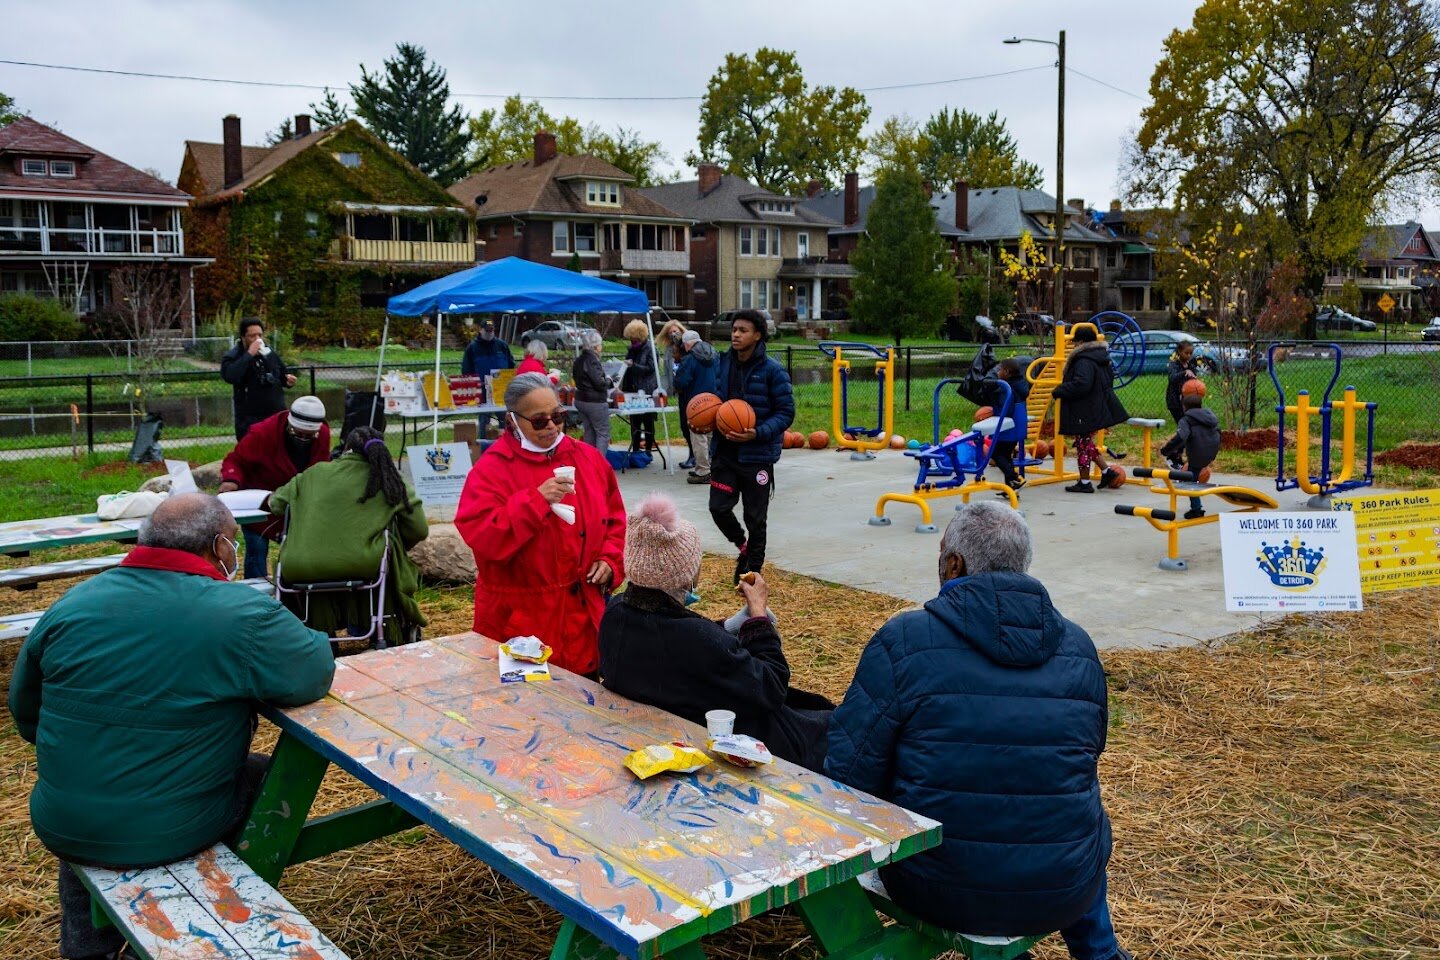 A scene from the Oct. 30 ribbon-cutting and opening of a new park in Virginia Park by KIP:D grantee 360 Detroit.